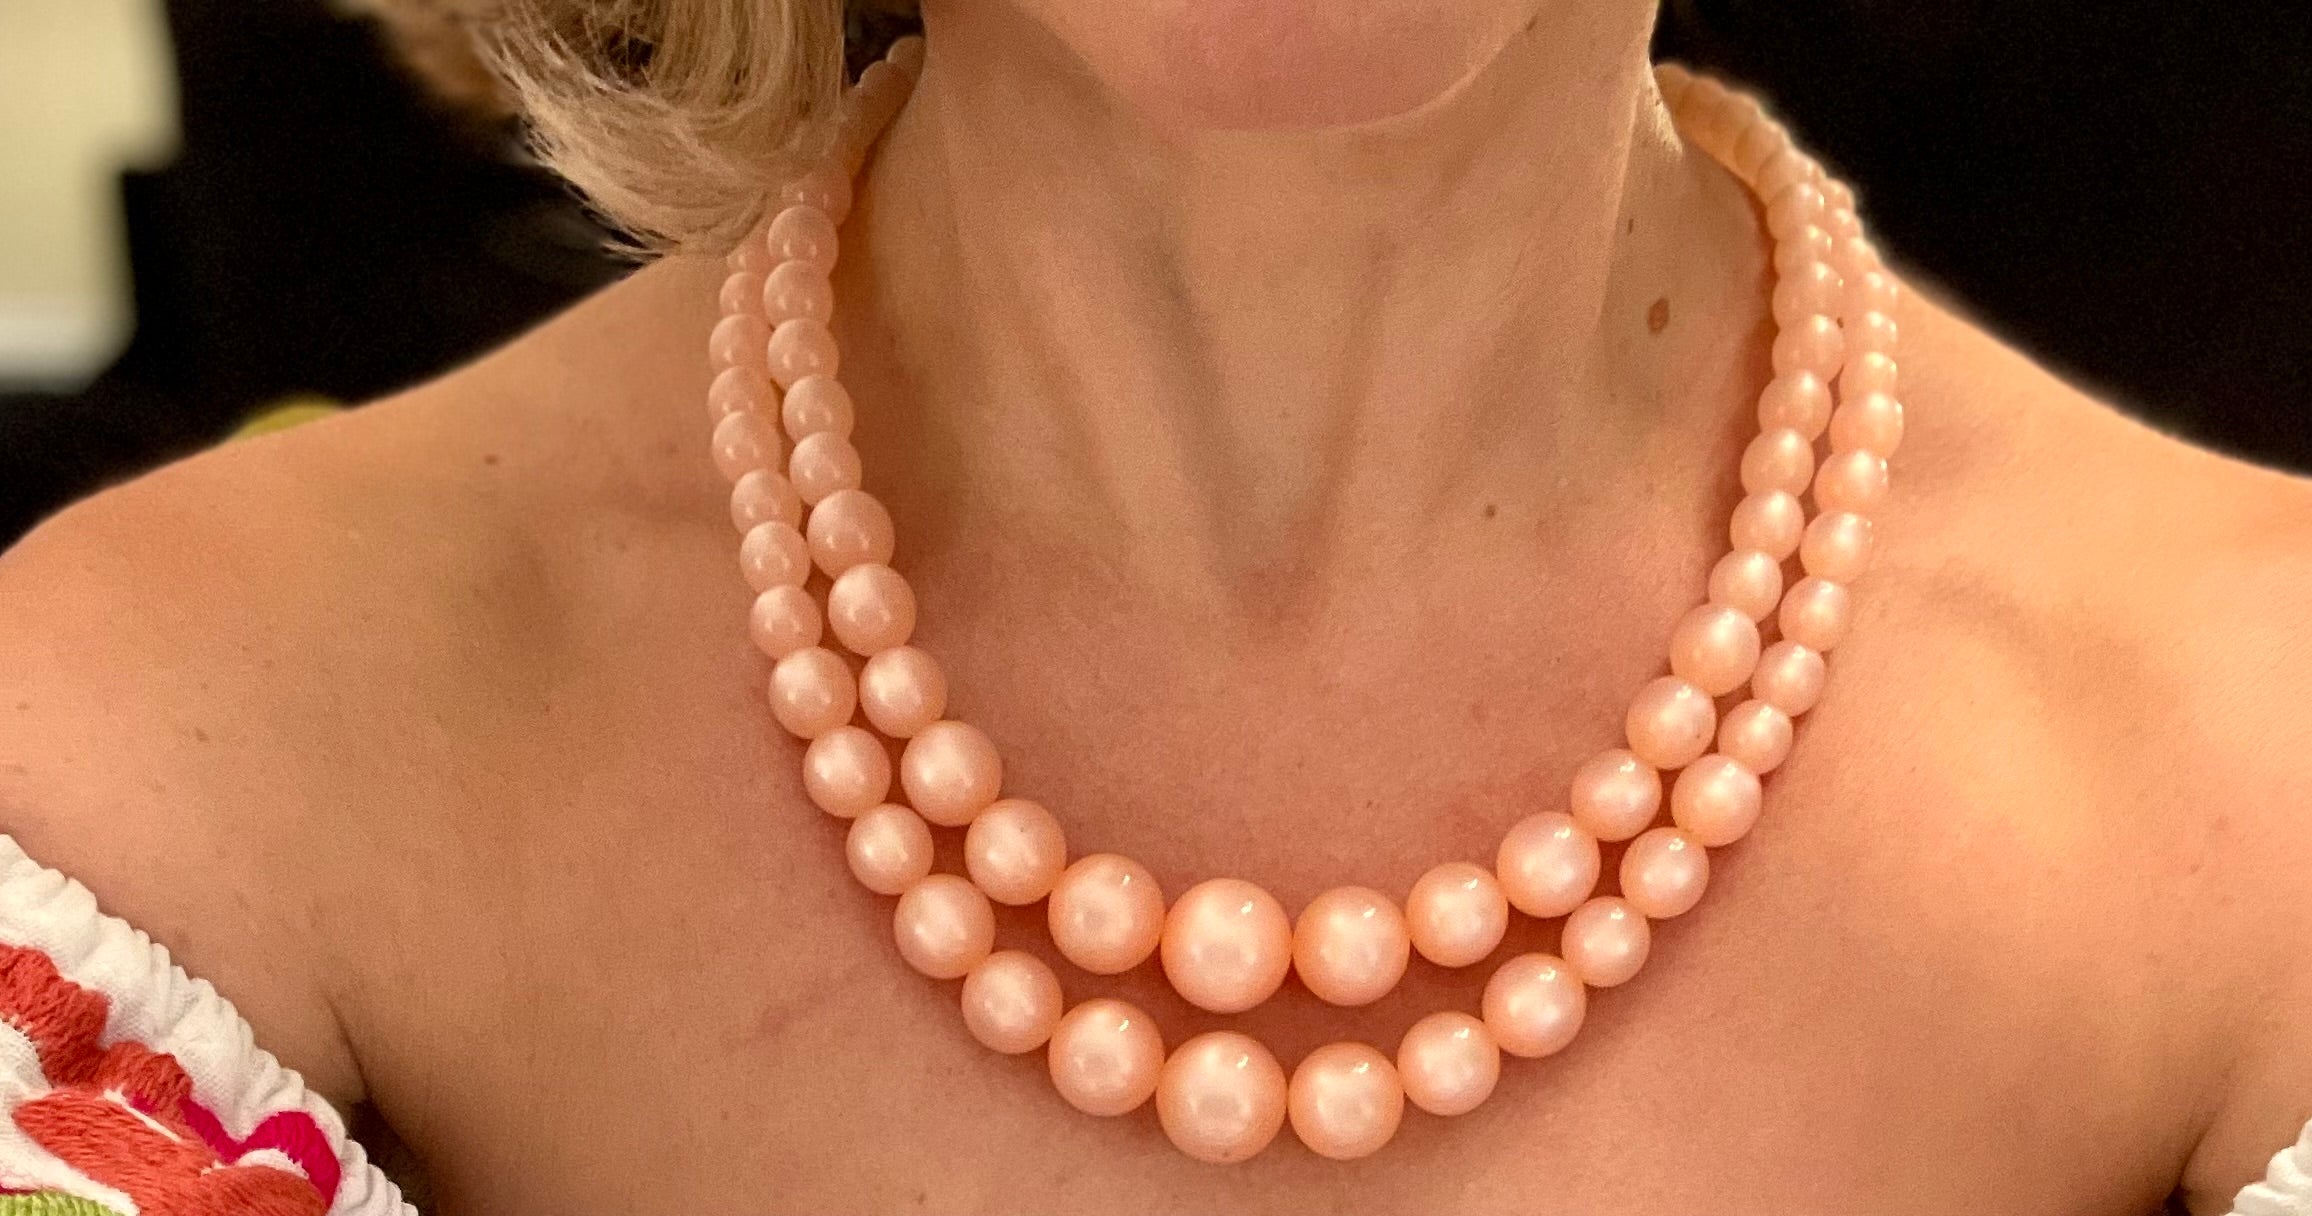 The most beautiful blush colored moon glow, classy double strand necklace...Oh so feminine